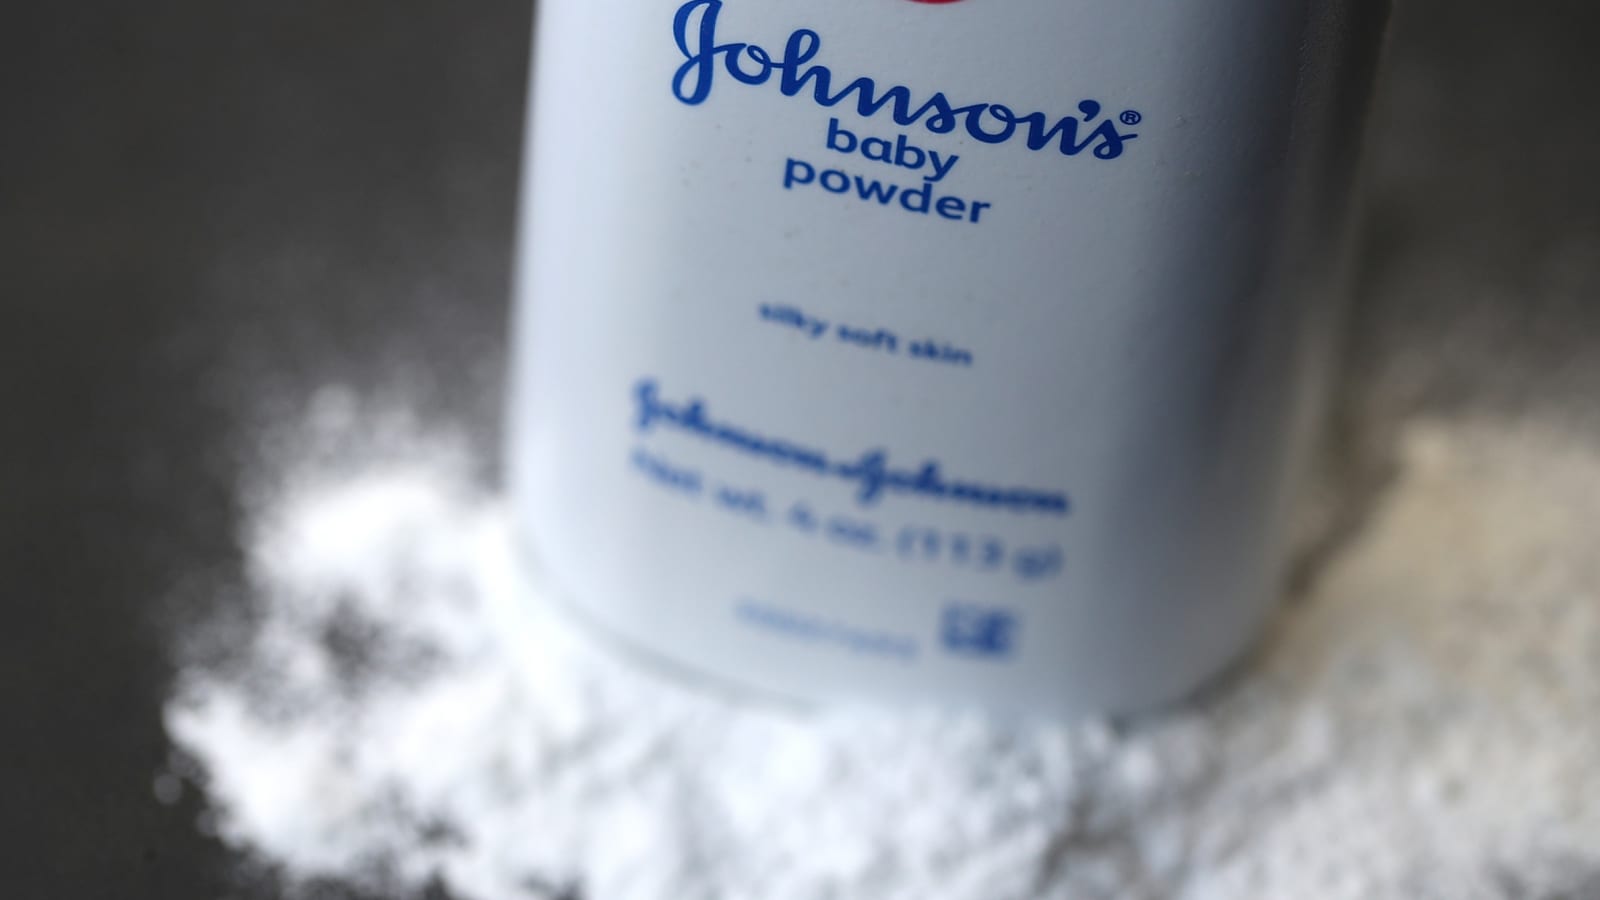 J&J attempted to shift responsibility for talc powder injury cases by forming a new company